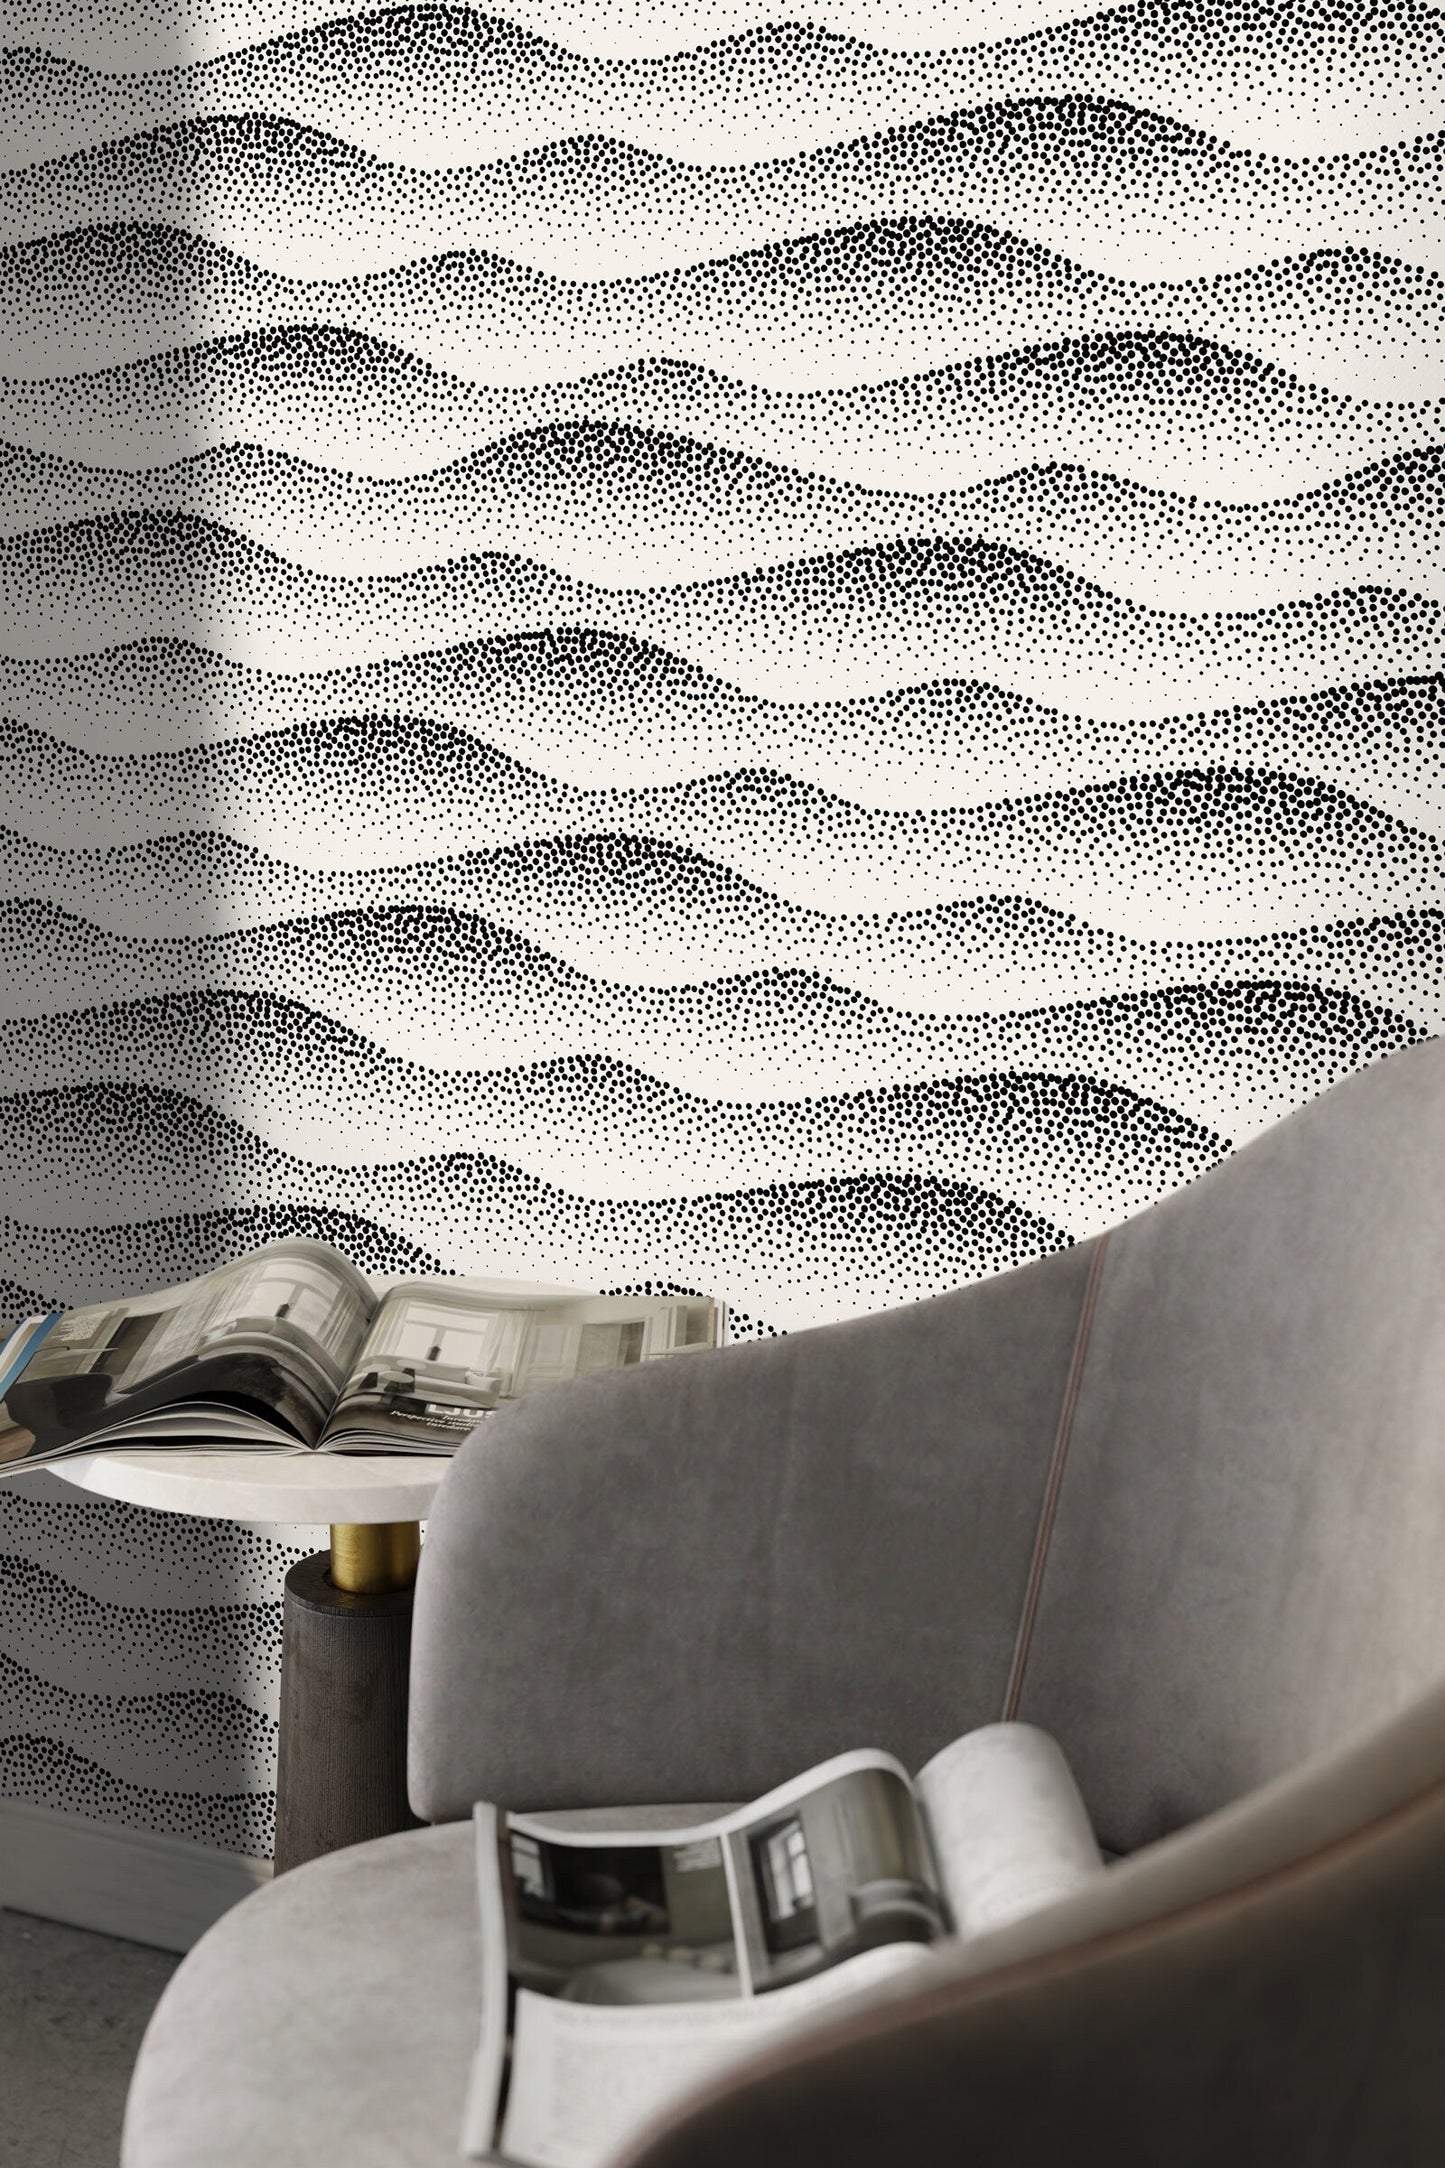 Beige Abstract Waves Wallpaper / Peel and Stick Wallpaper Removable Wallpaper Home Decor Wall Art Wall Decor Room Decor - C731